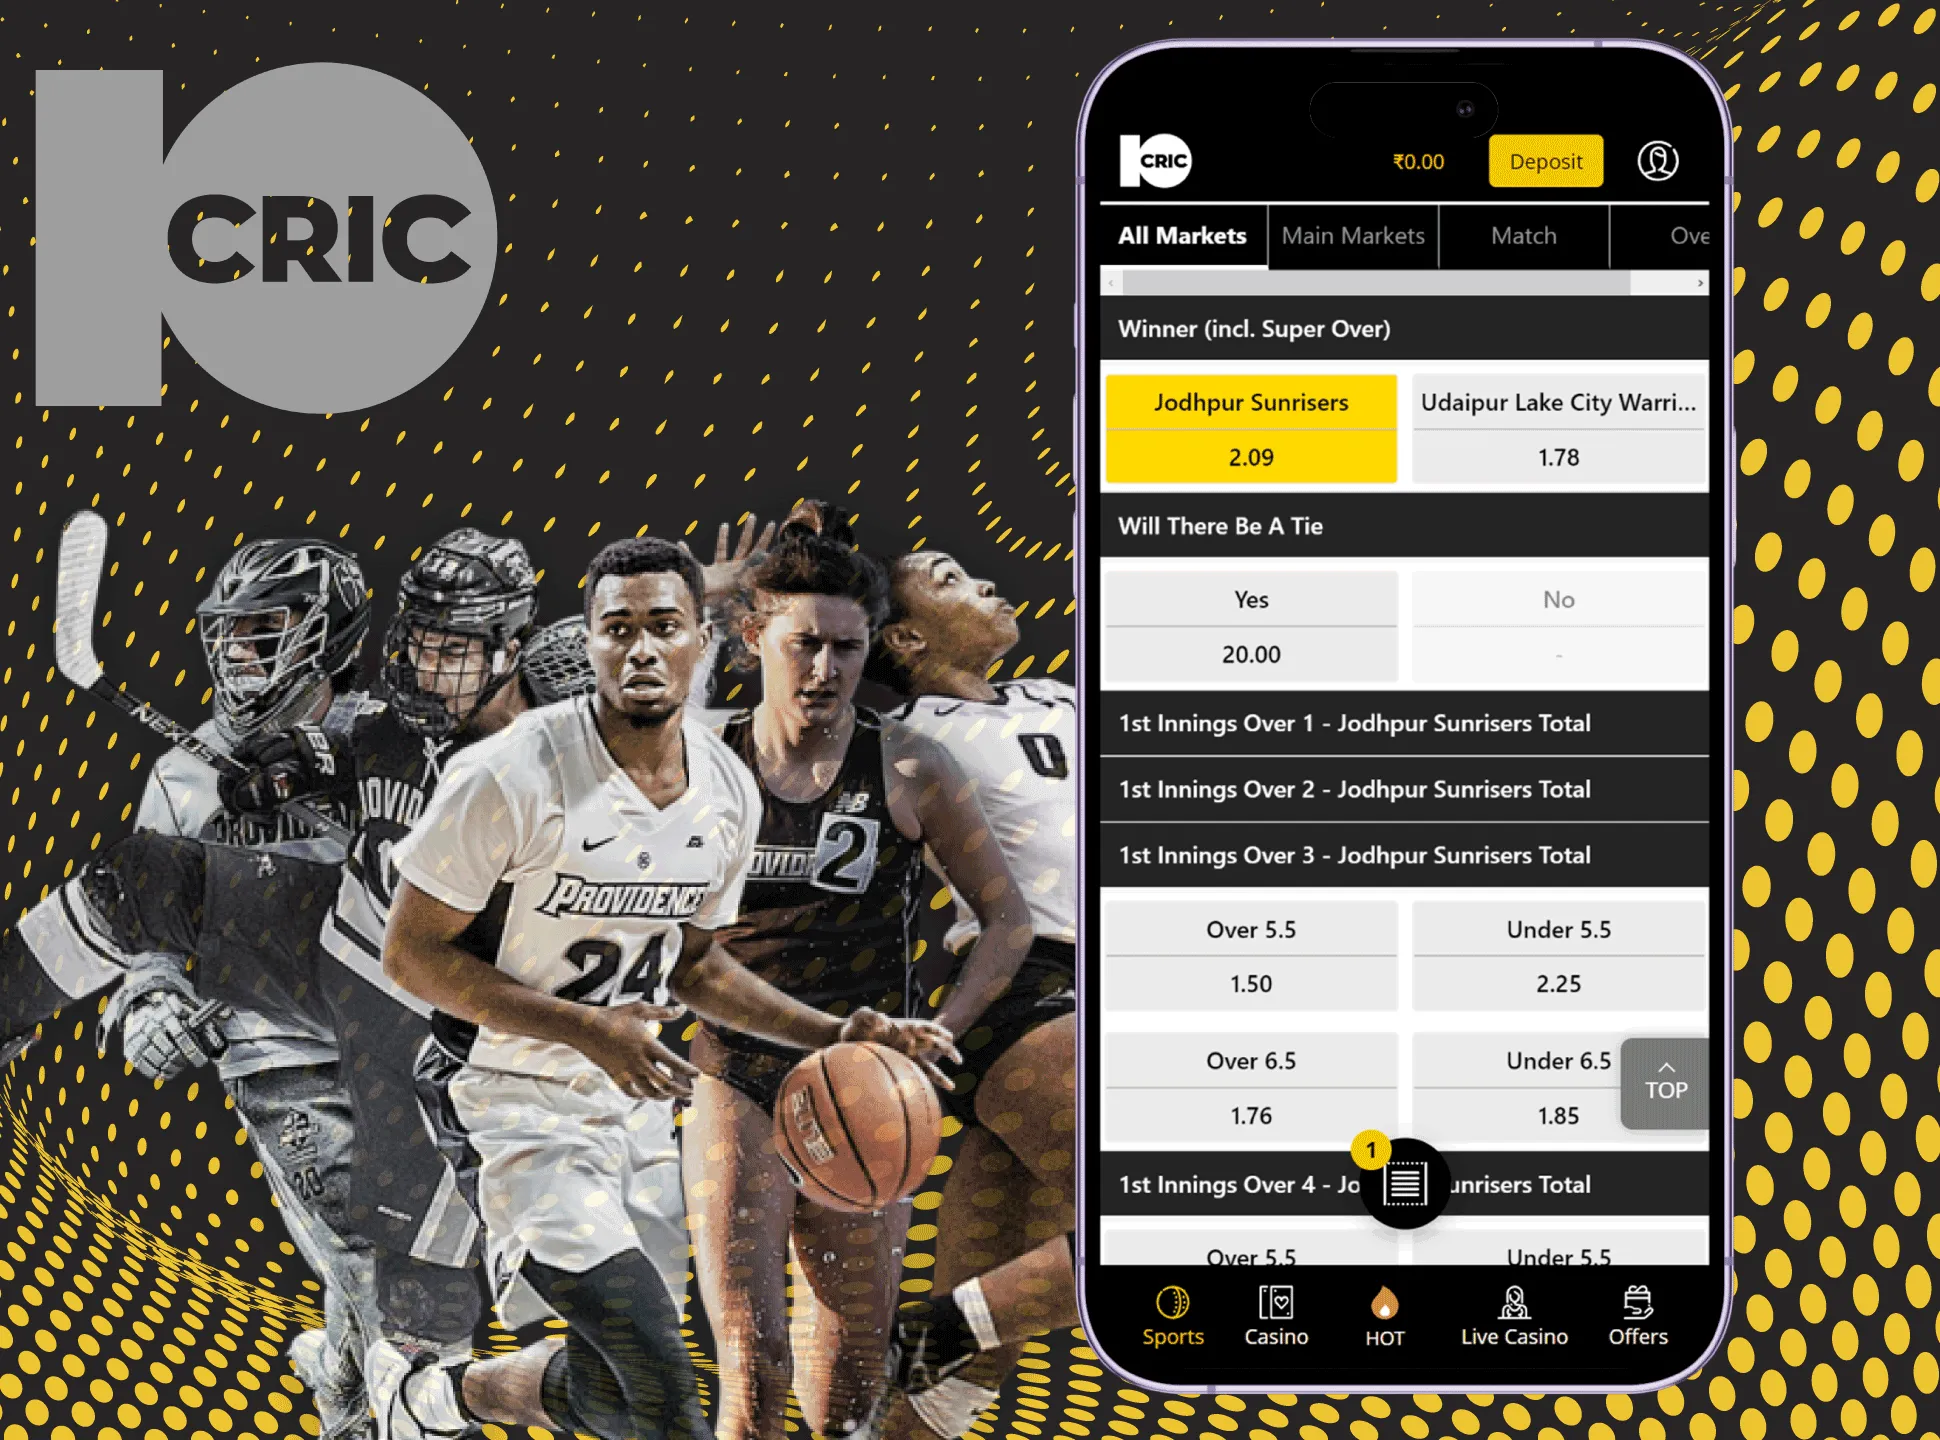 You can place single, express bets in the 10cric sportsbook.